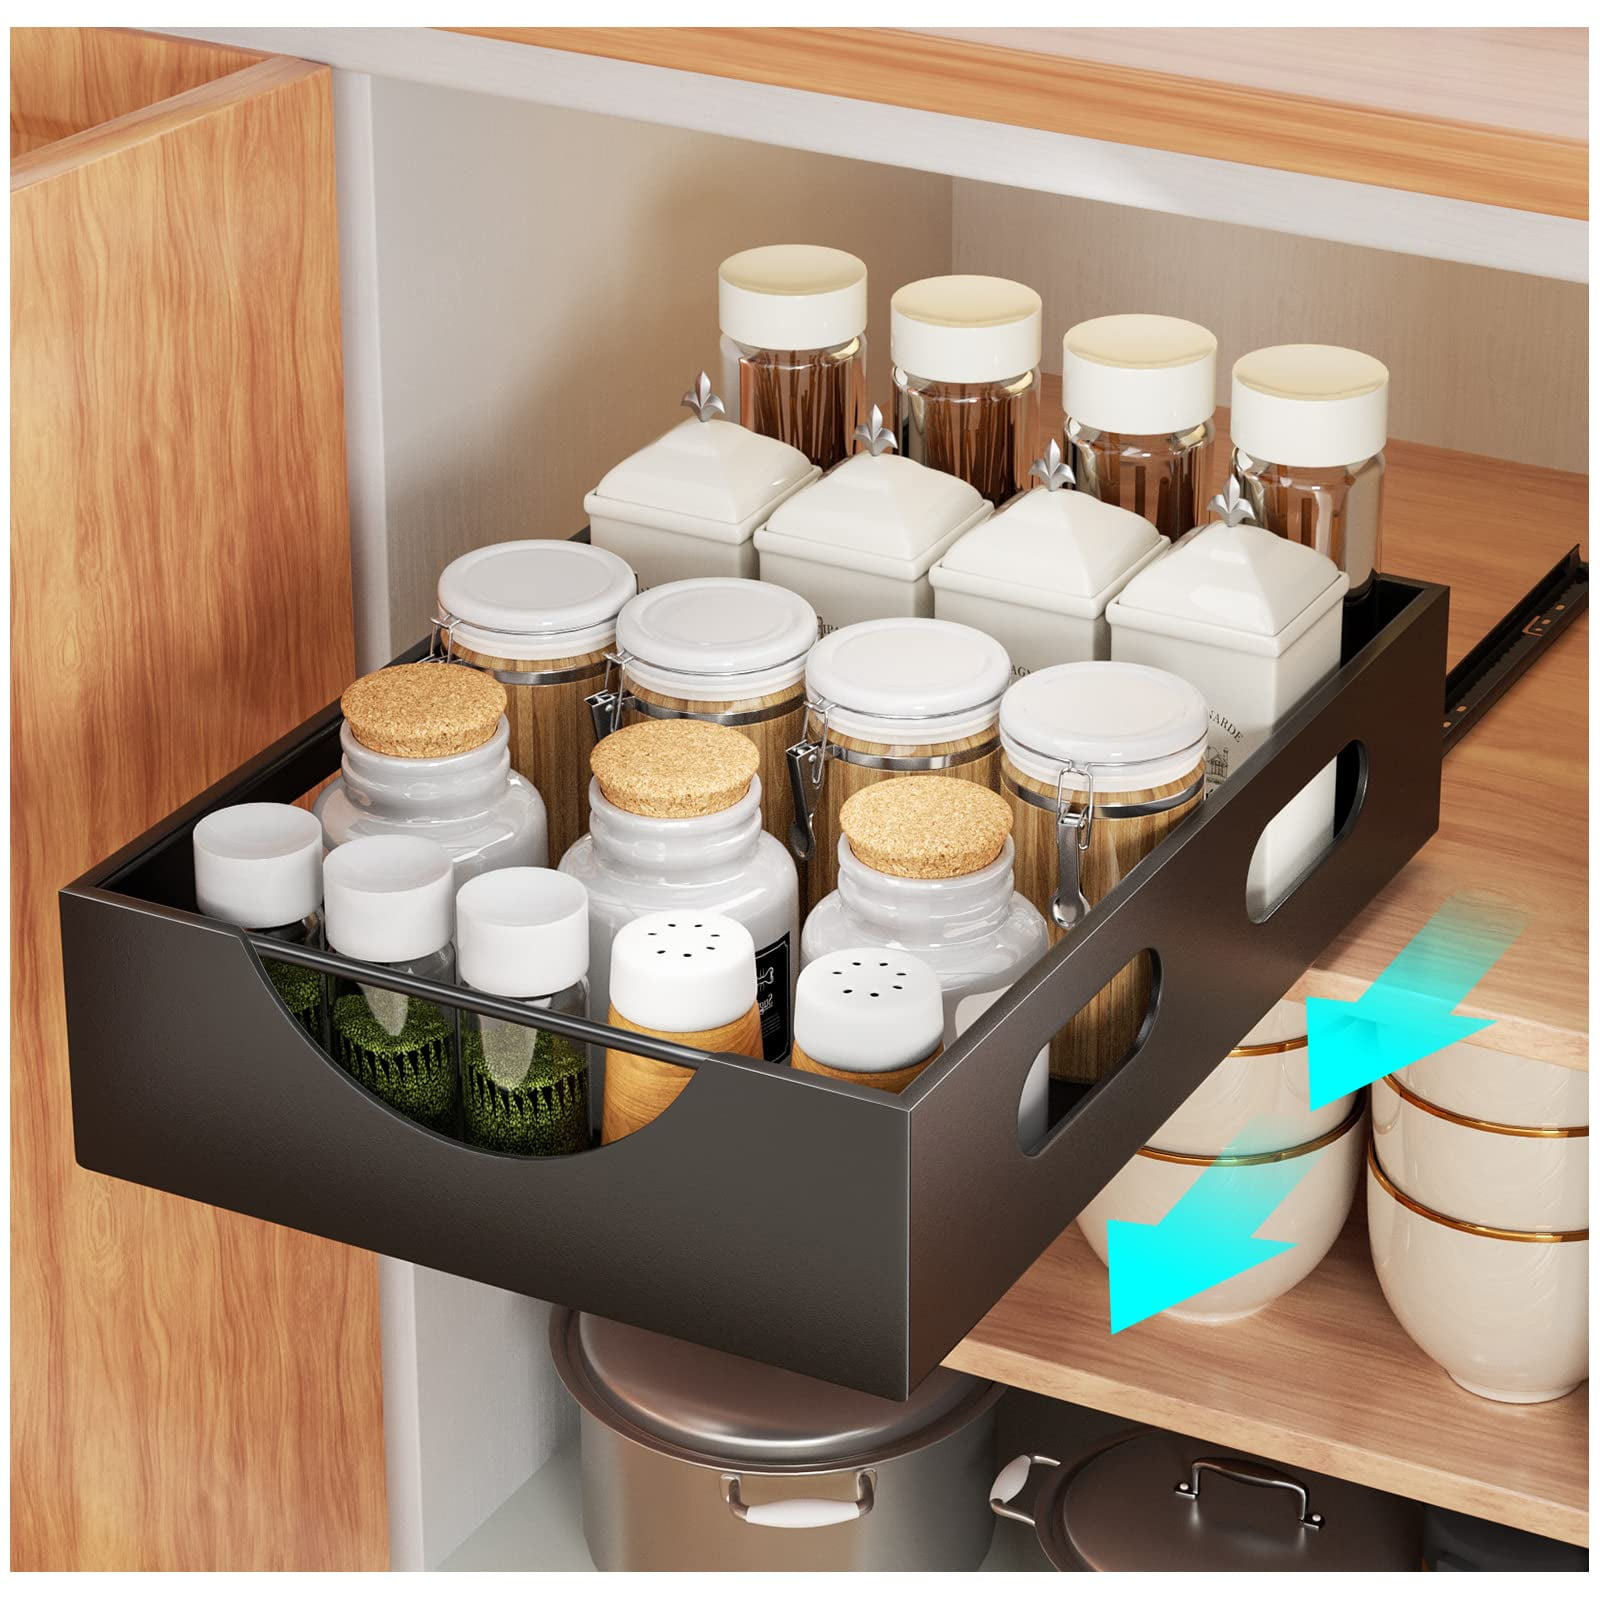 Pull out Cabinet Organizer, Expandable(11.7-19.7) Heavy Duty Slide out  Drawers Fixed with Adhesive Nano Film for Pots, Roll out Shelf Storage for